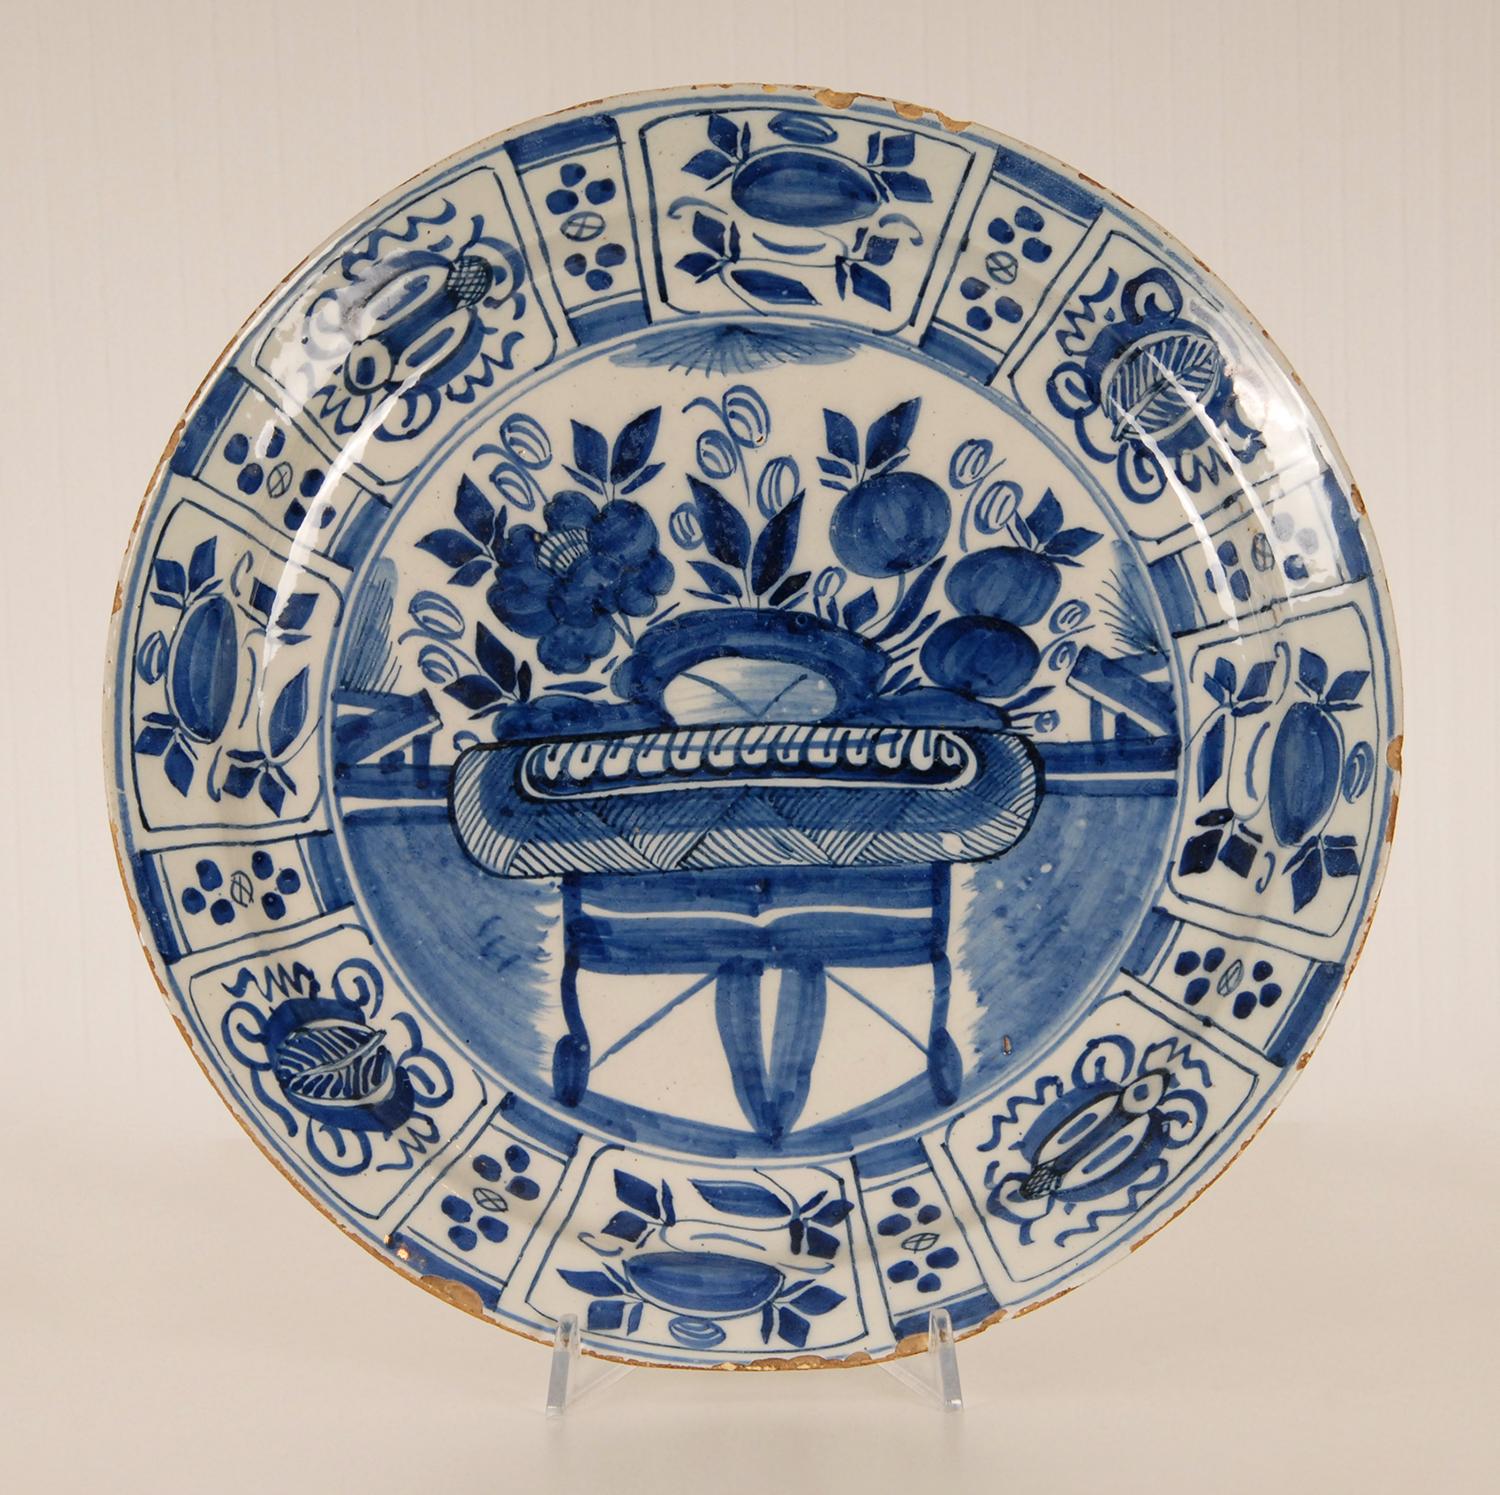 17th century Delft plate Chinoiserie Ming Style Baroque period
Material: Delft, earthenware, pottery.
Design: Chinese Ming Dish, Chinese Kraak style
Style: Baroque, Antique, Asian antique, Oriental
Origin: Netherlands, Delft mid 17th century ca 1650